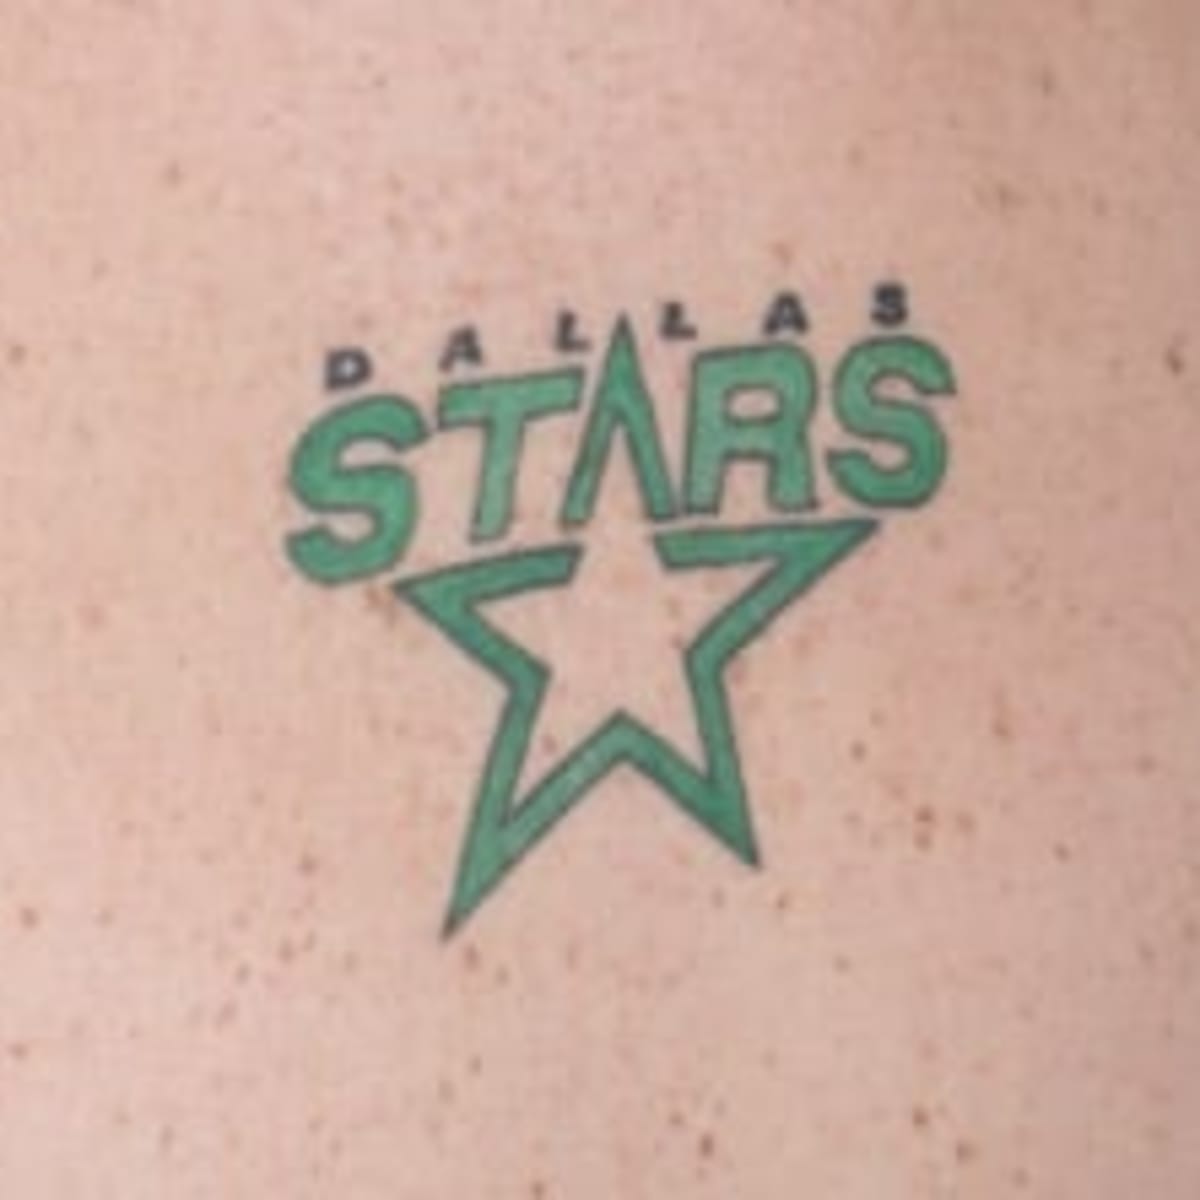 Exclusive Dallas Stars tattoos revealed the stories behind them